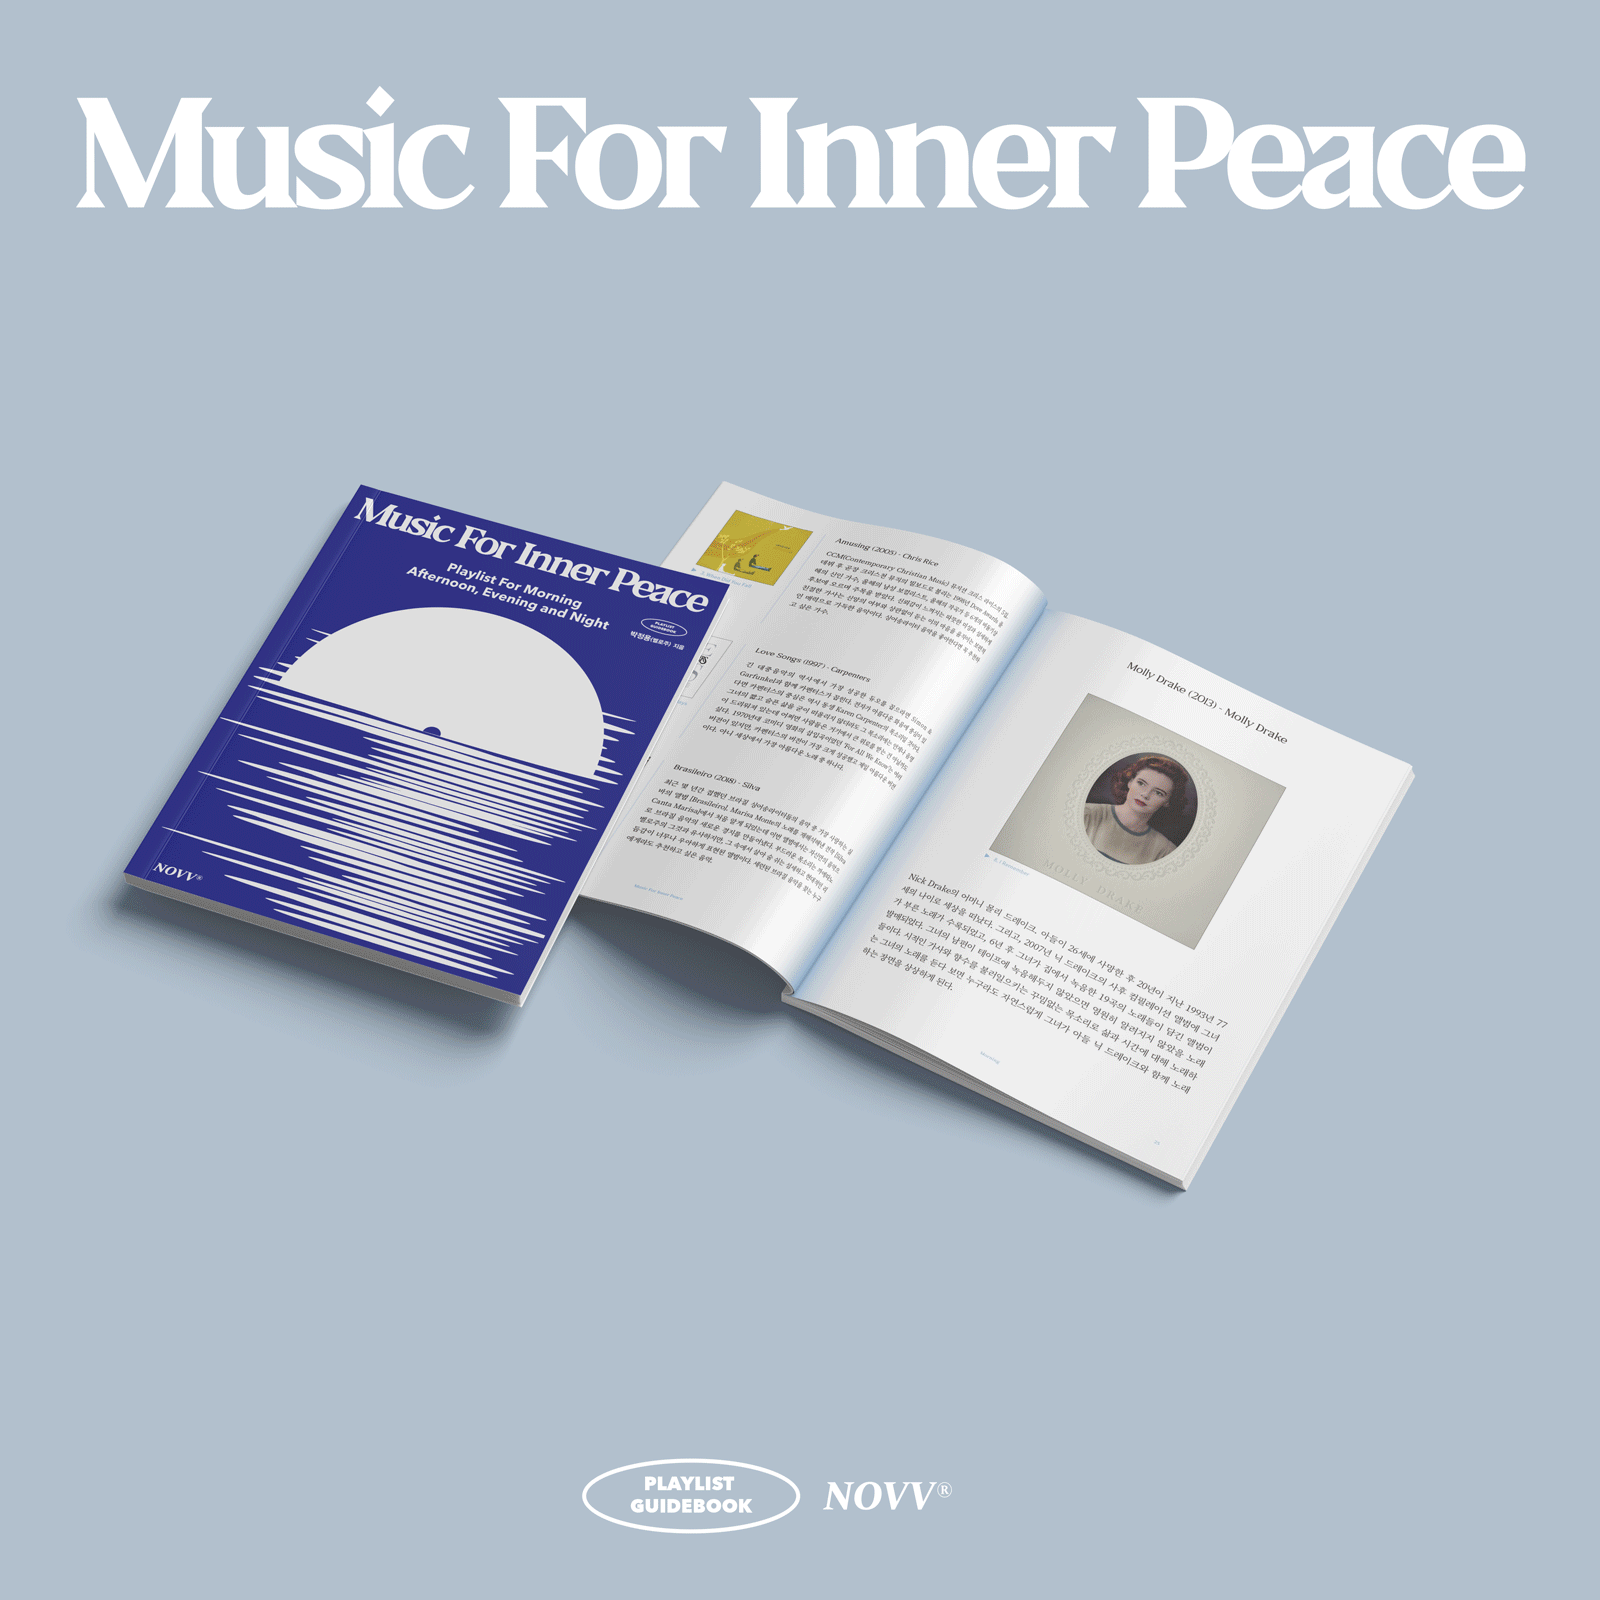 Music For Inner Peace (뮤직 포 이너 피스)